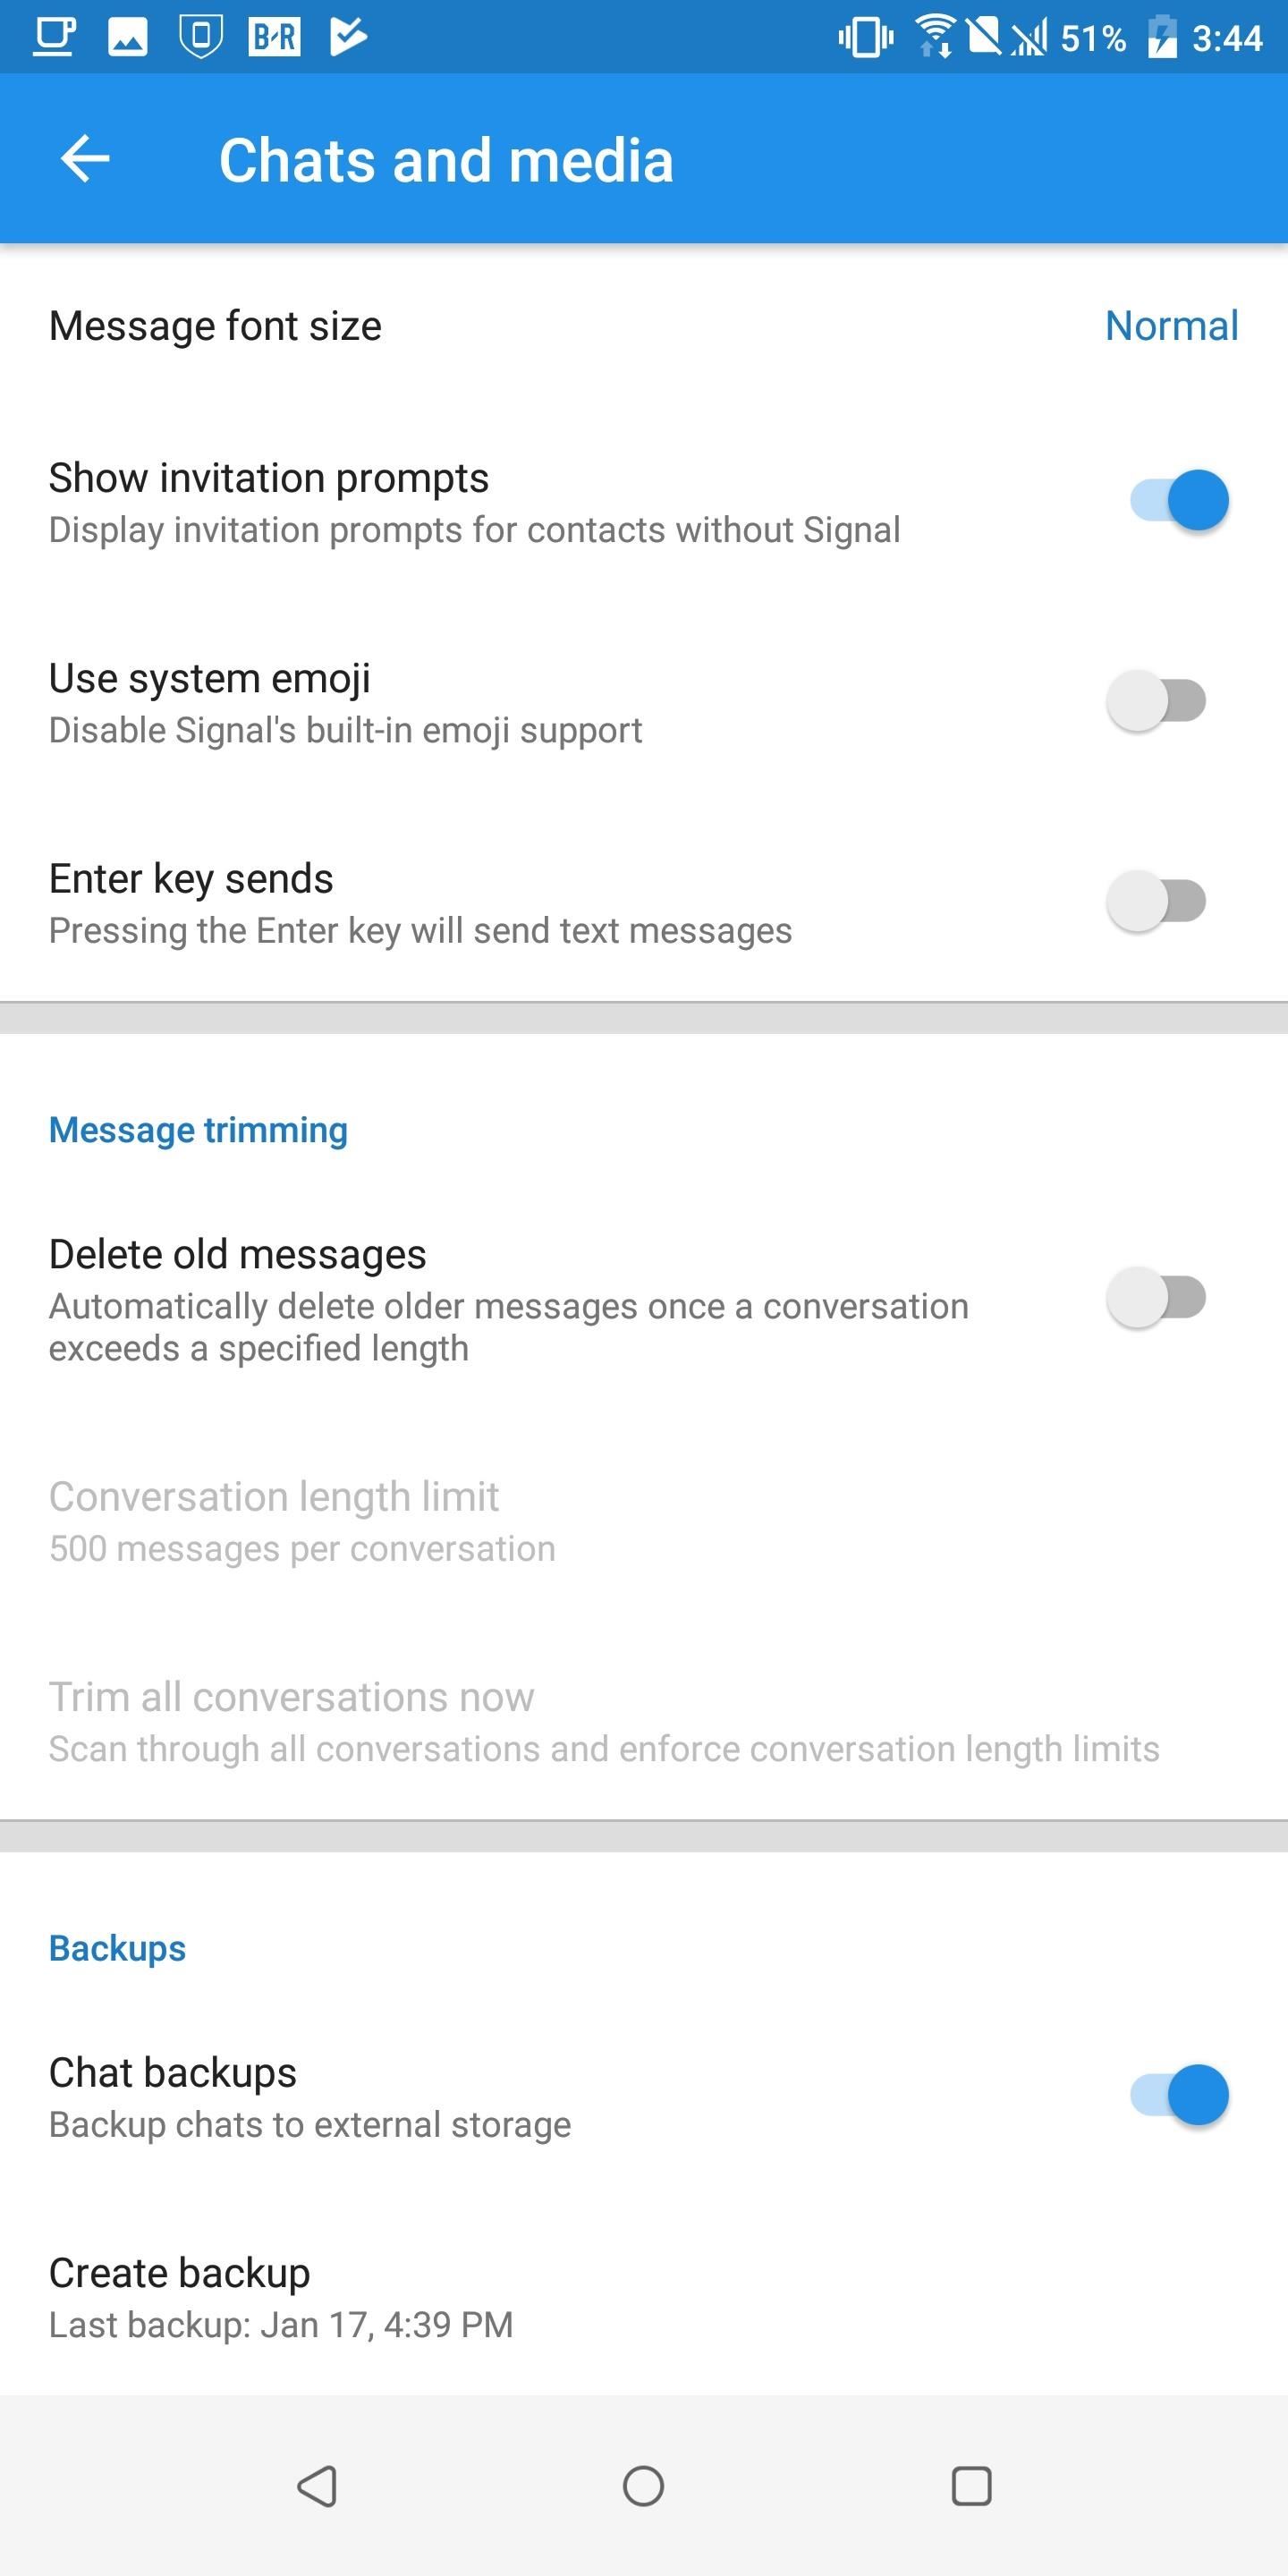 How to Back Up & Restore Your Signal Messages on Android